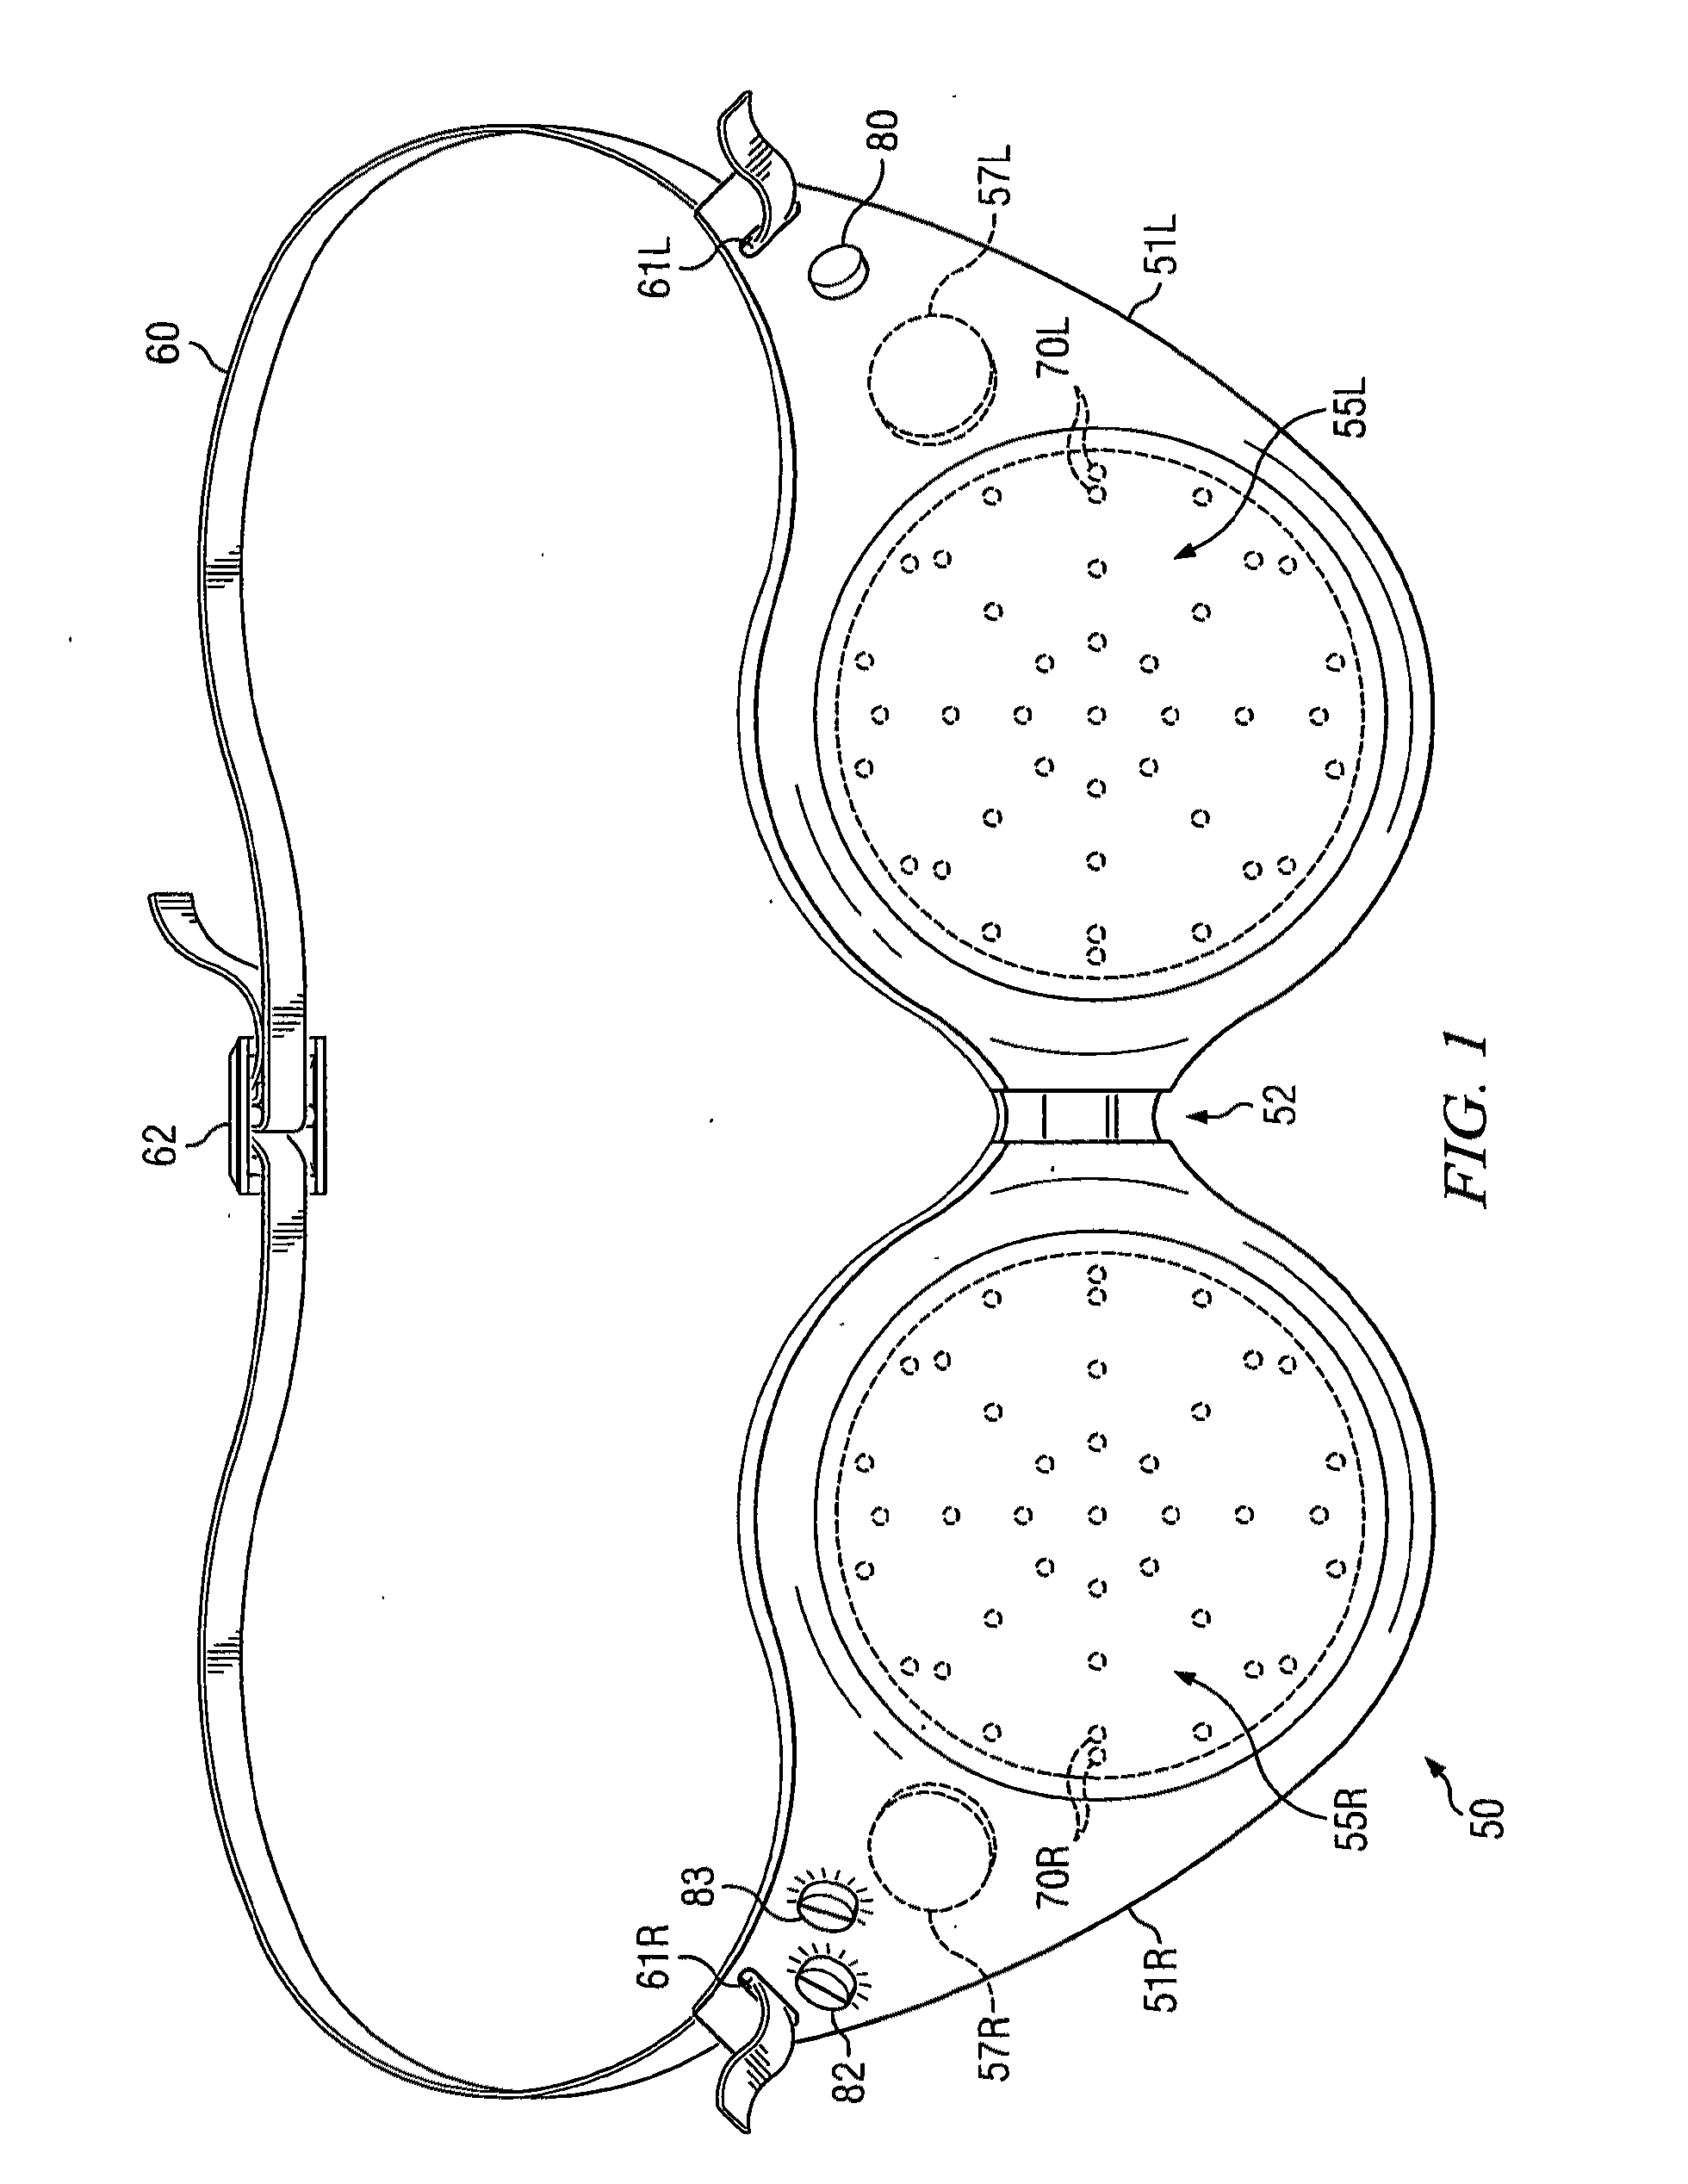 Apparatus and method for eye exercises